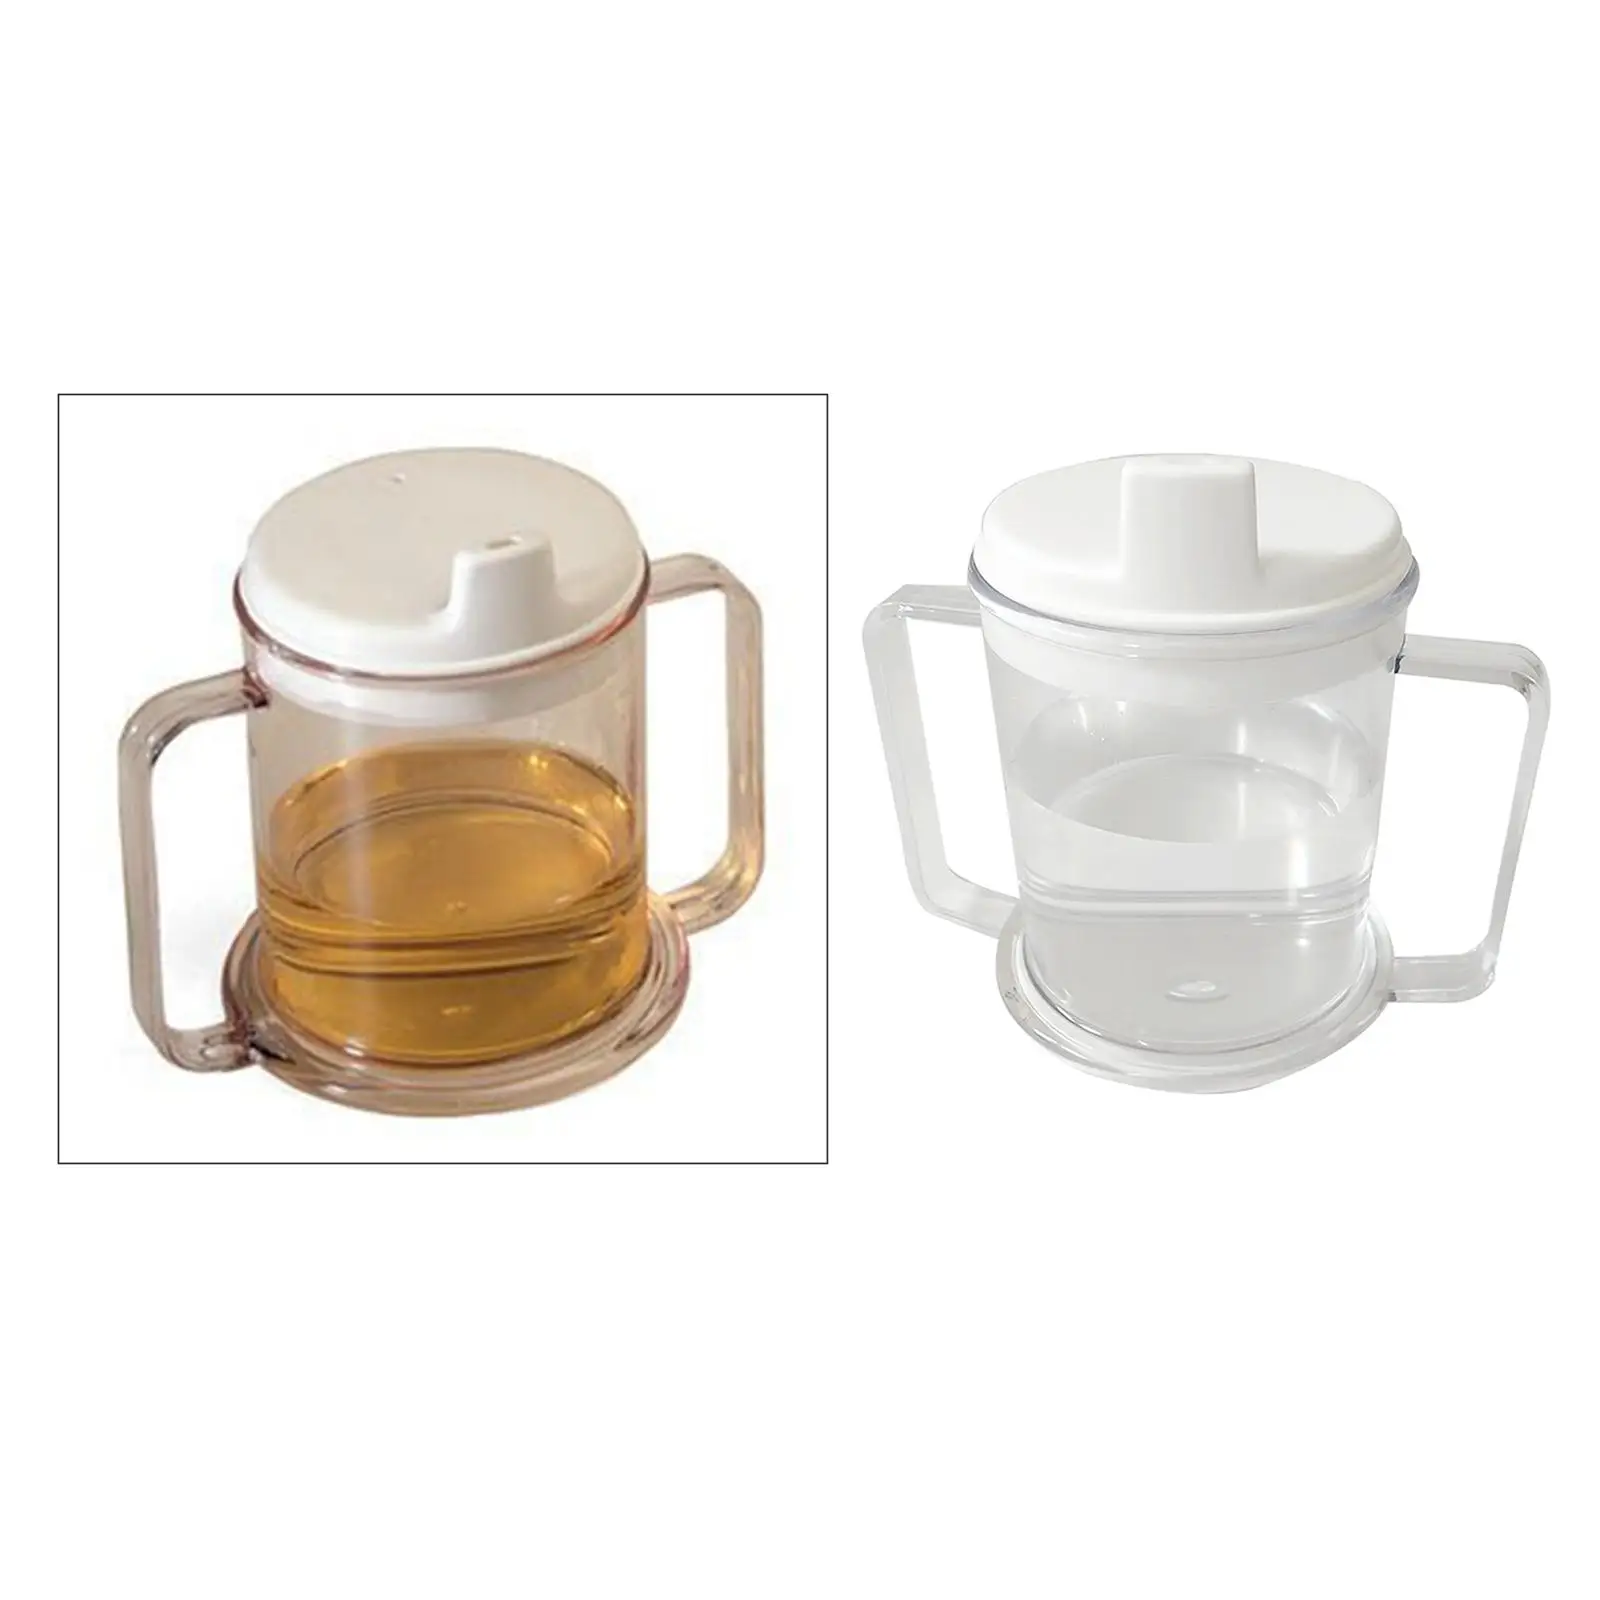 2 Handle Plastic Clear Mug Lightweight Drinking Cup Handles Sippy Cup